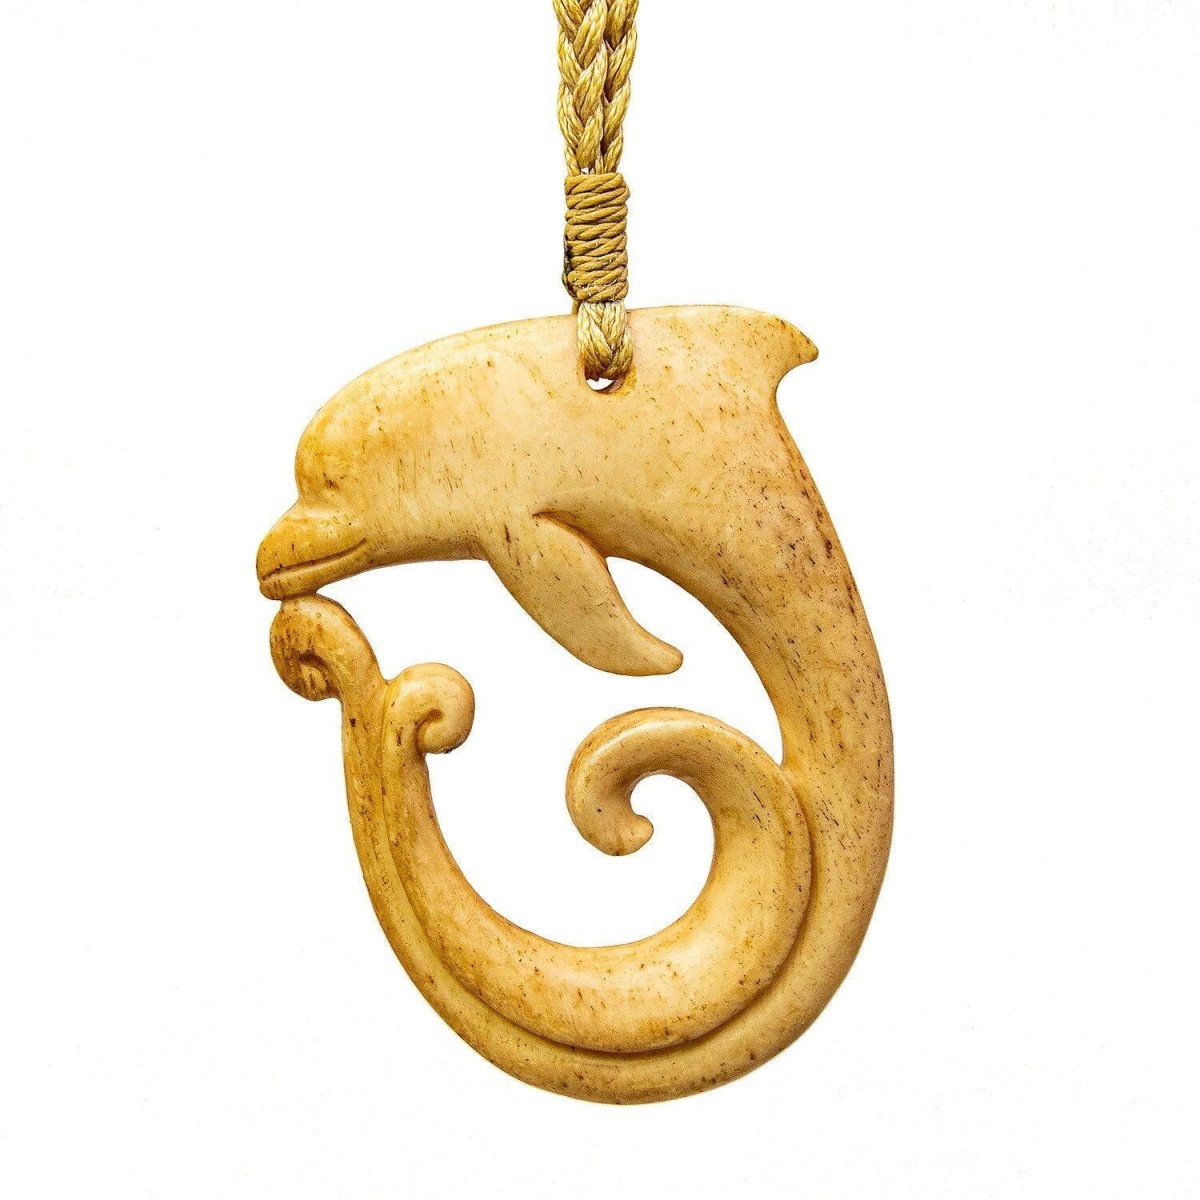 Hand Carved Pacific Islands Inspired Bone Koru Dolphin Necklace - Earthbound Pacific